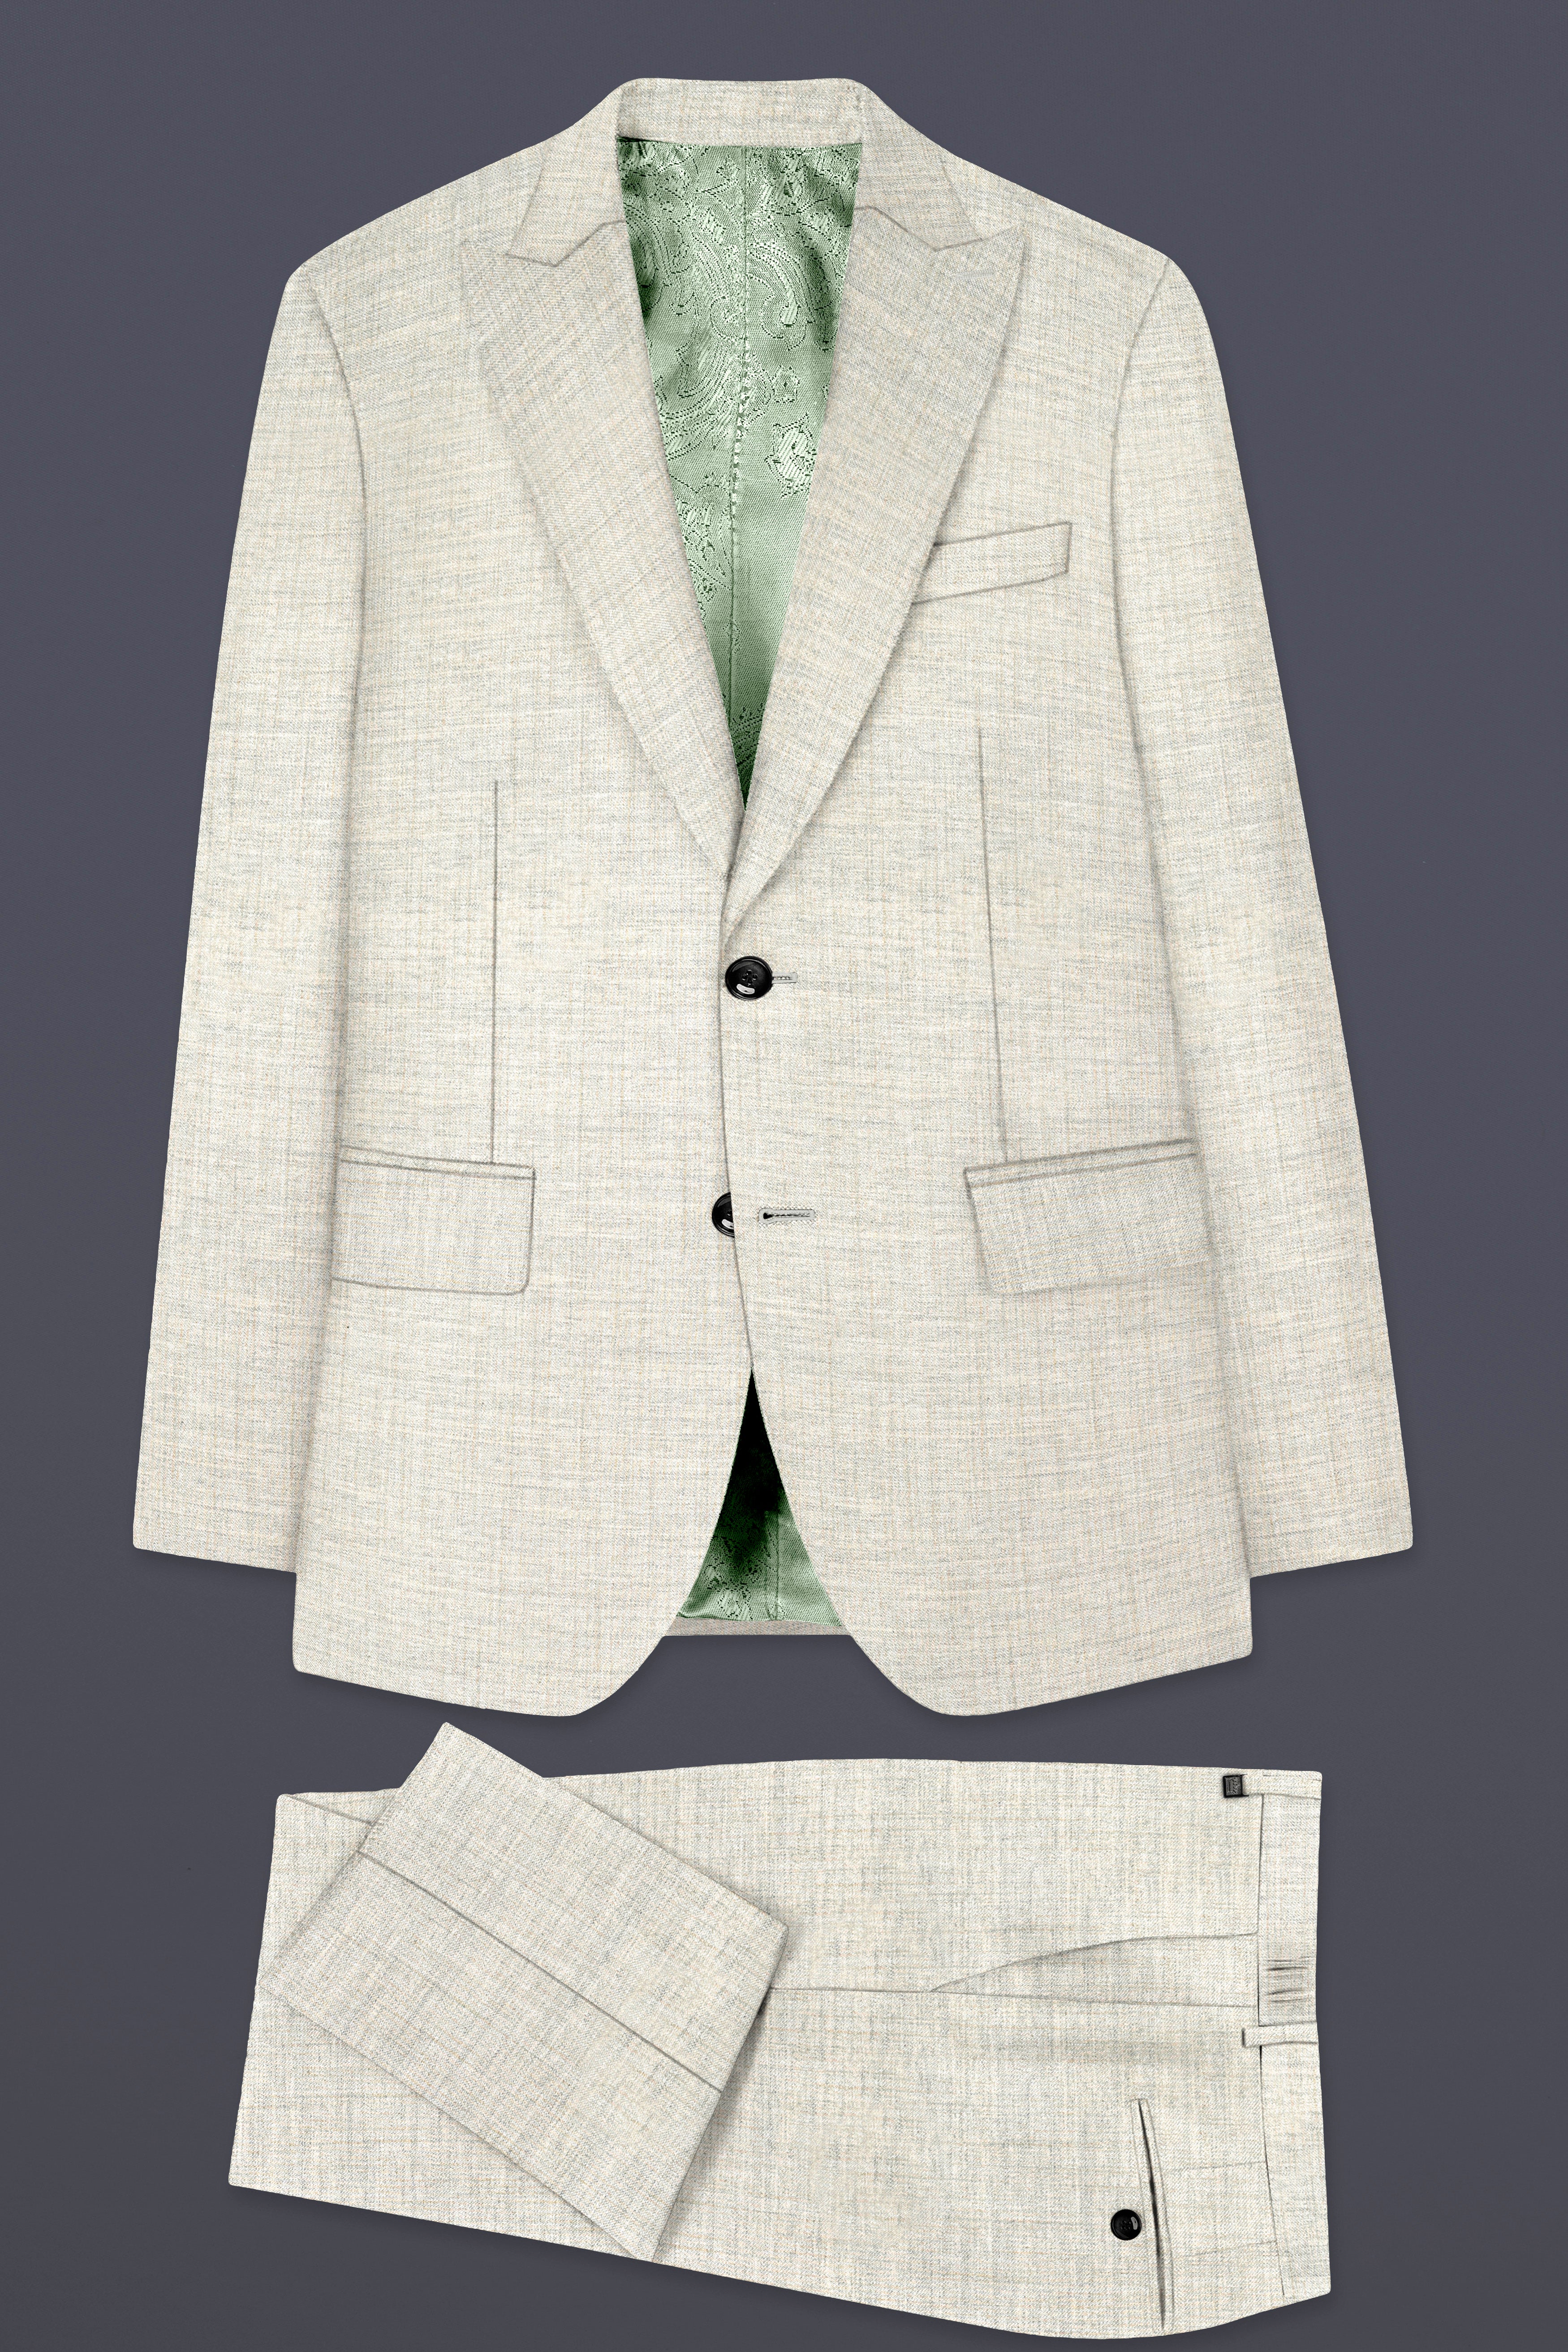 Spanish Gray Textured Wool Blend Suit